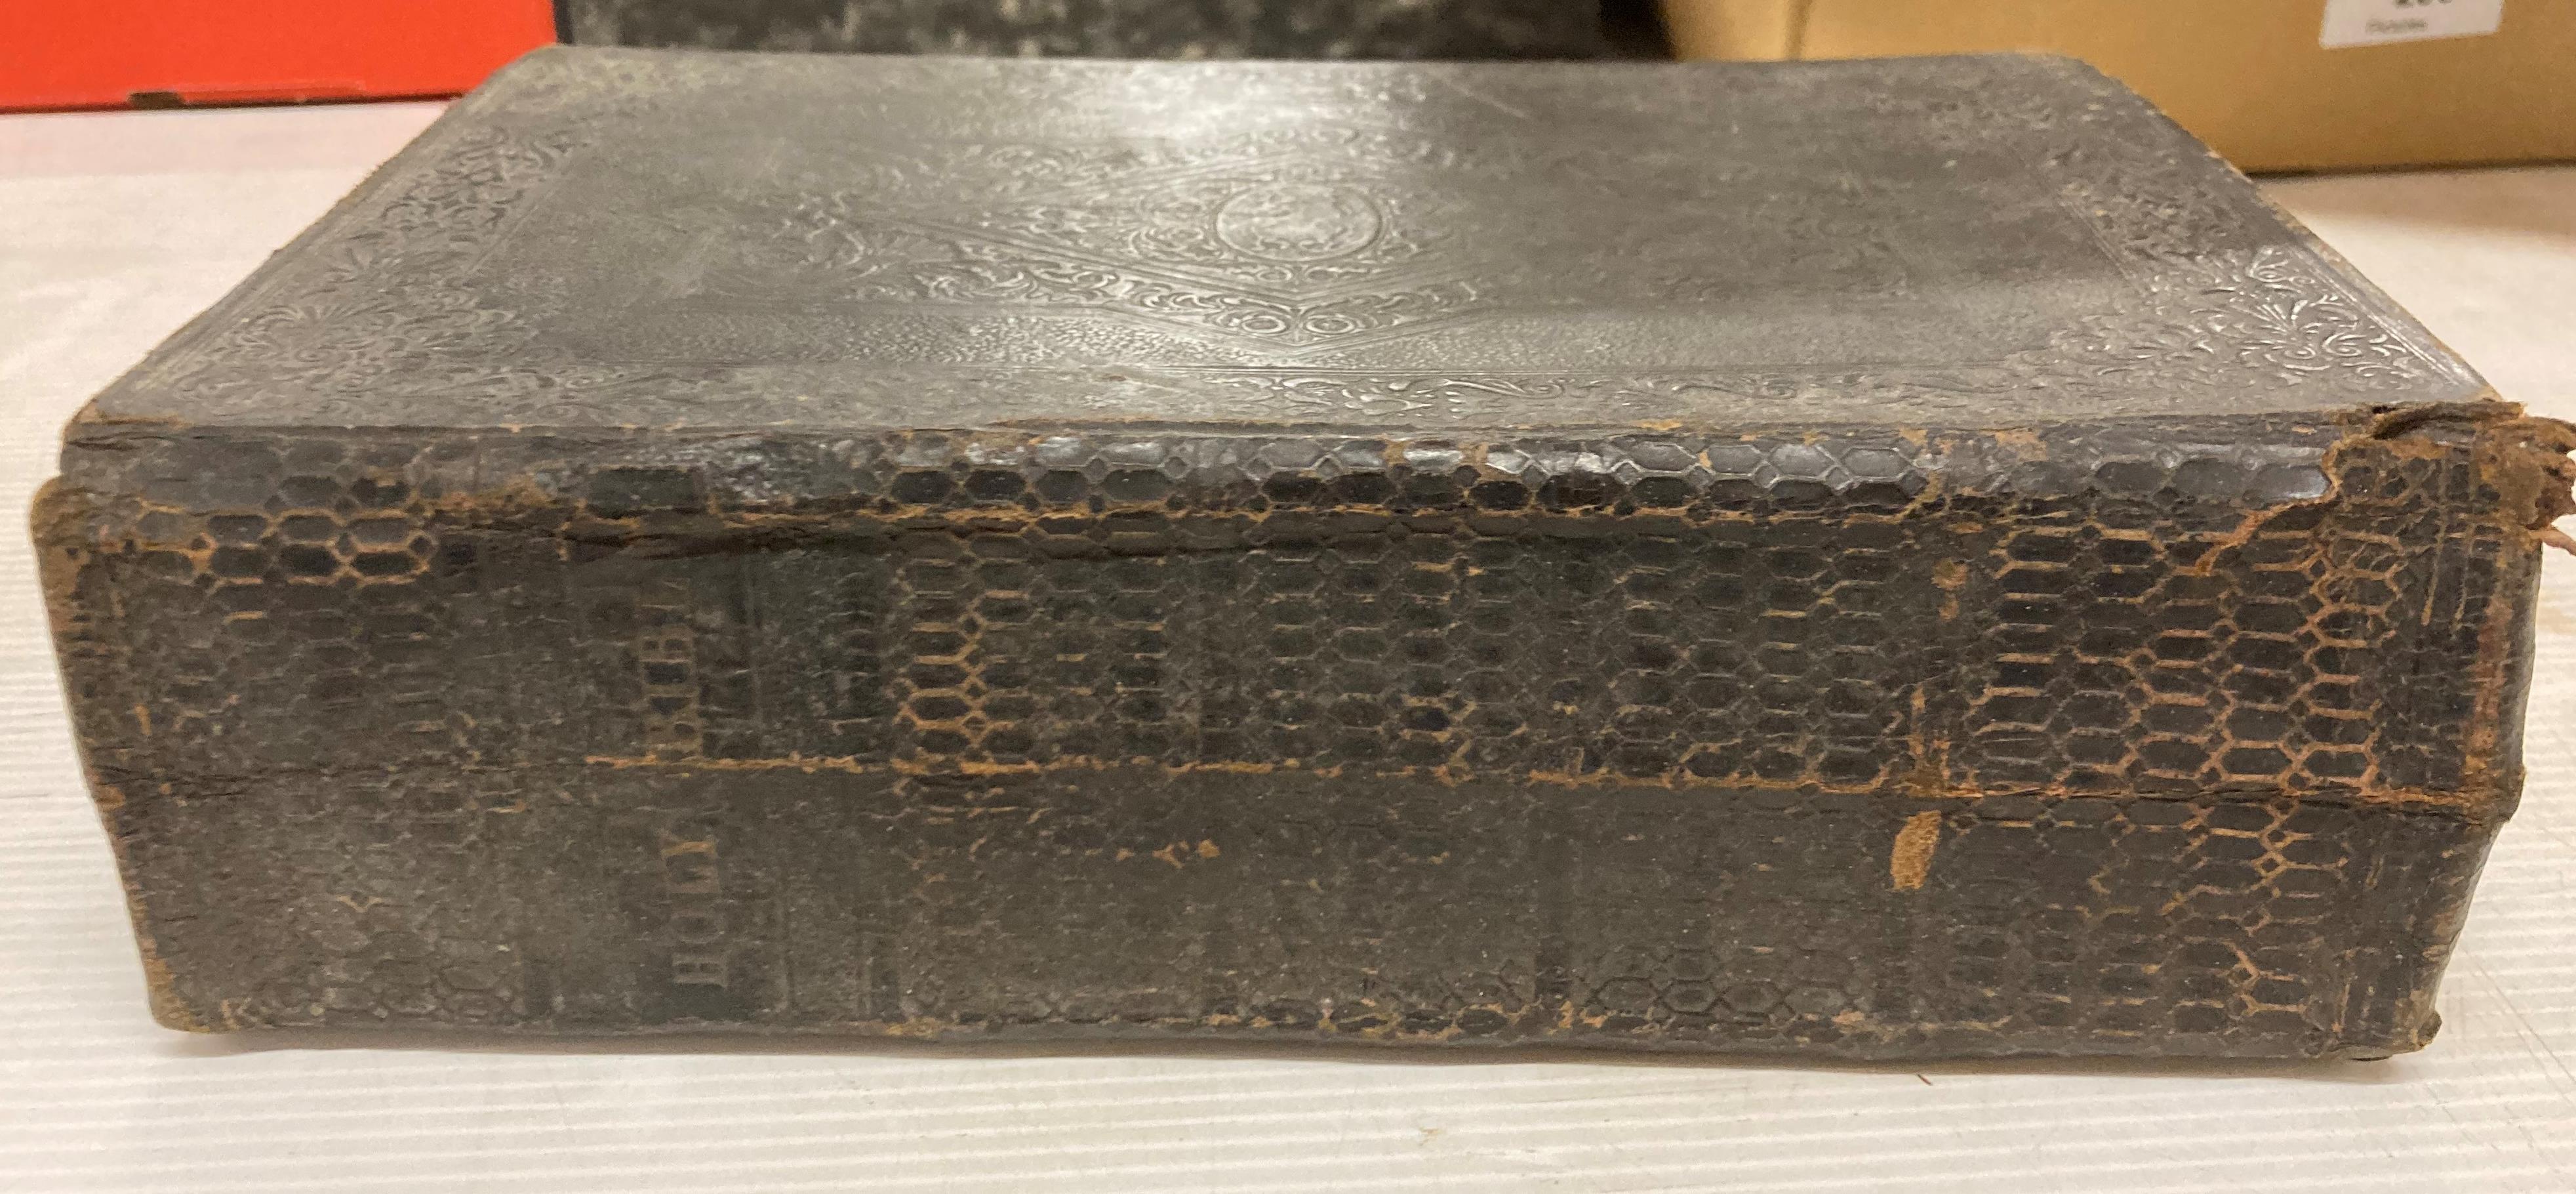 An old copy of the Holy Bible in poor condition (Saleroom location: H08) - Image 2 of 6